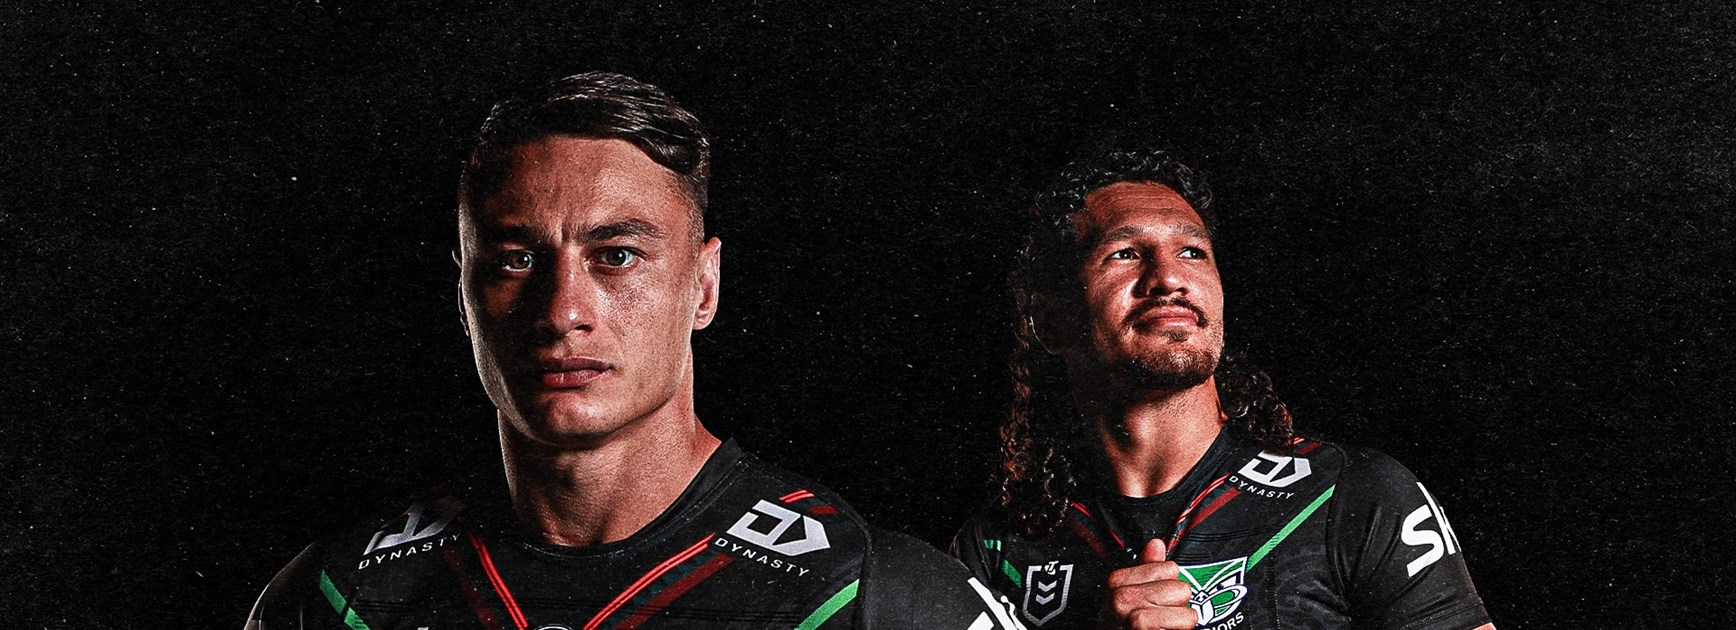 Confirmed Lineup: Tuaupiki out, DWZ to fullback